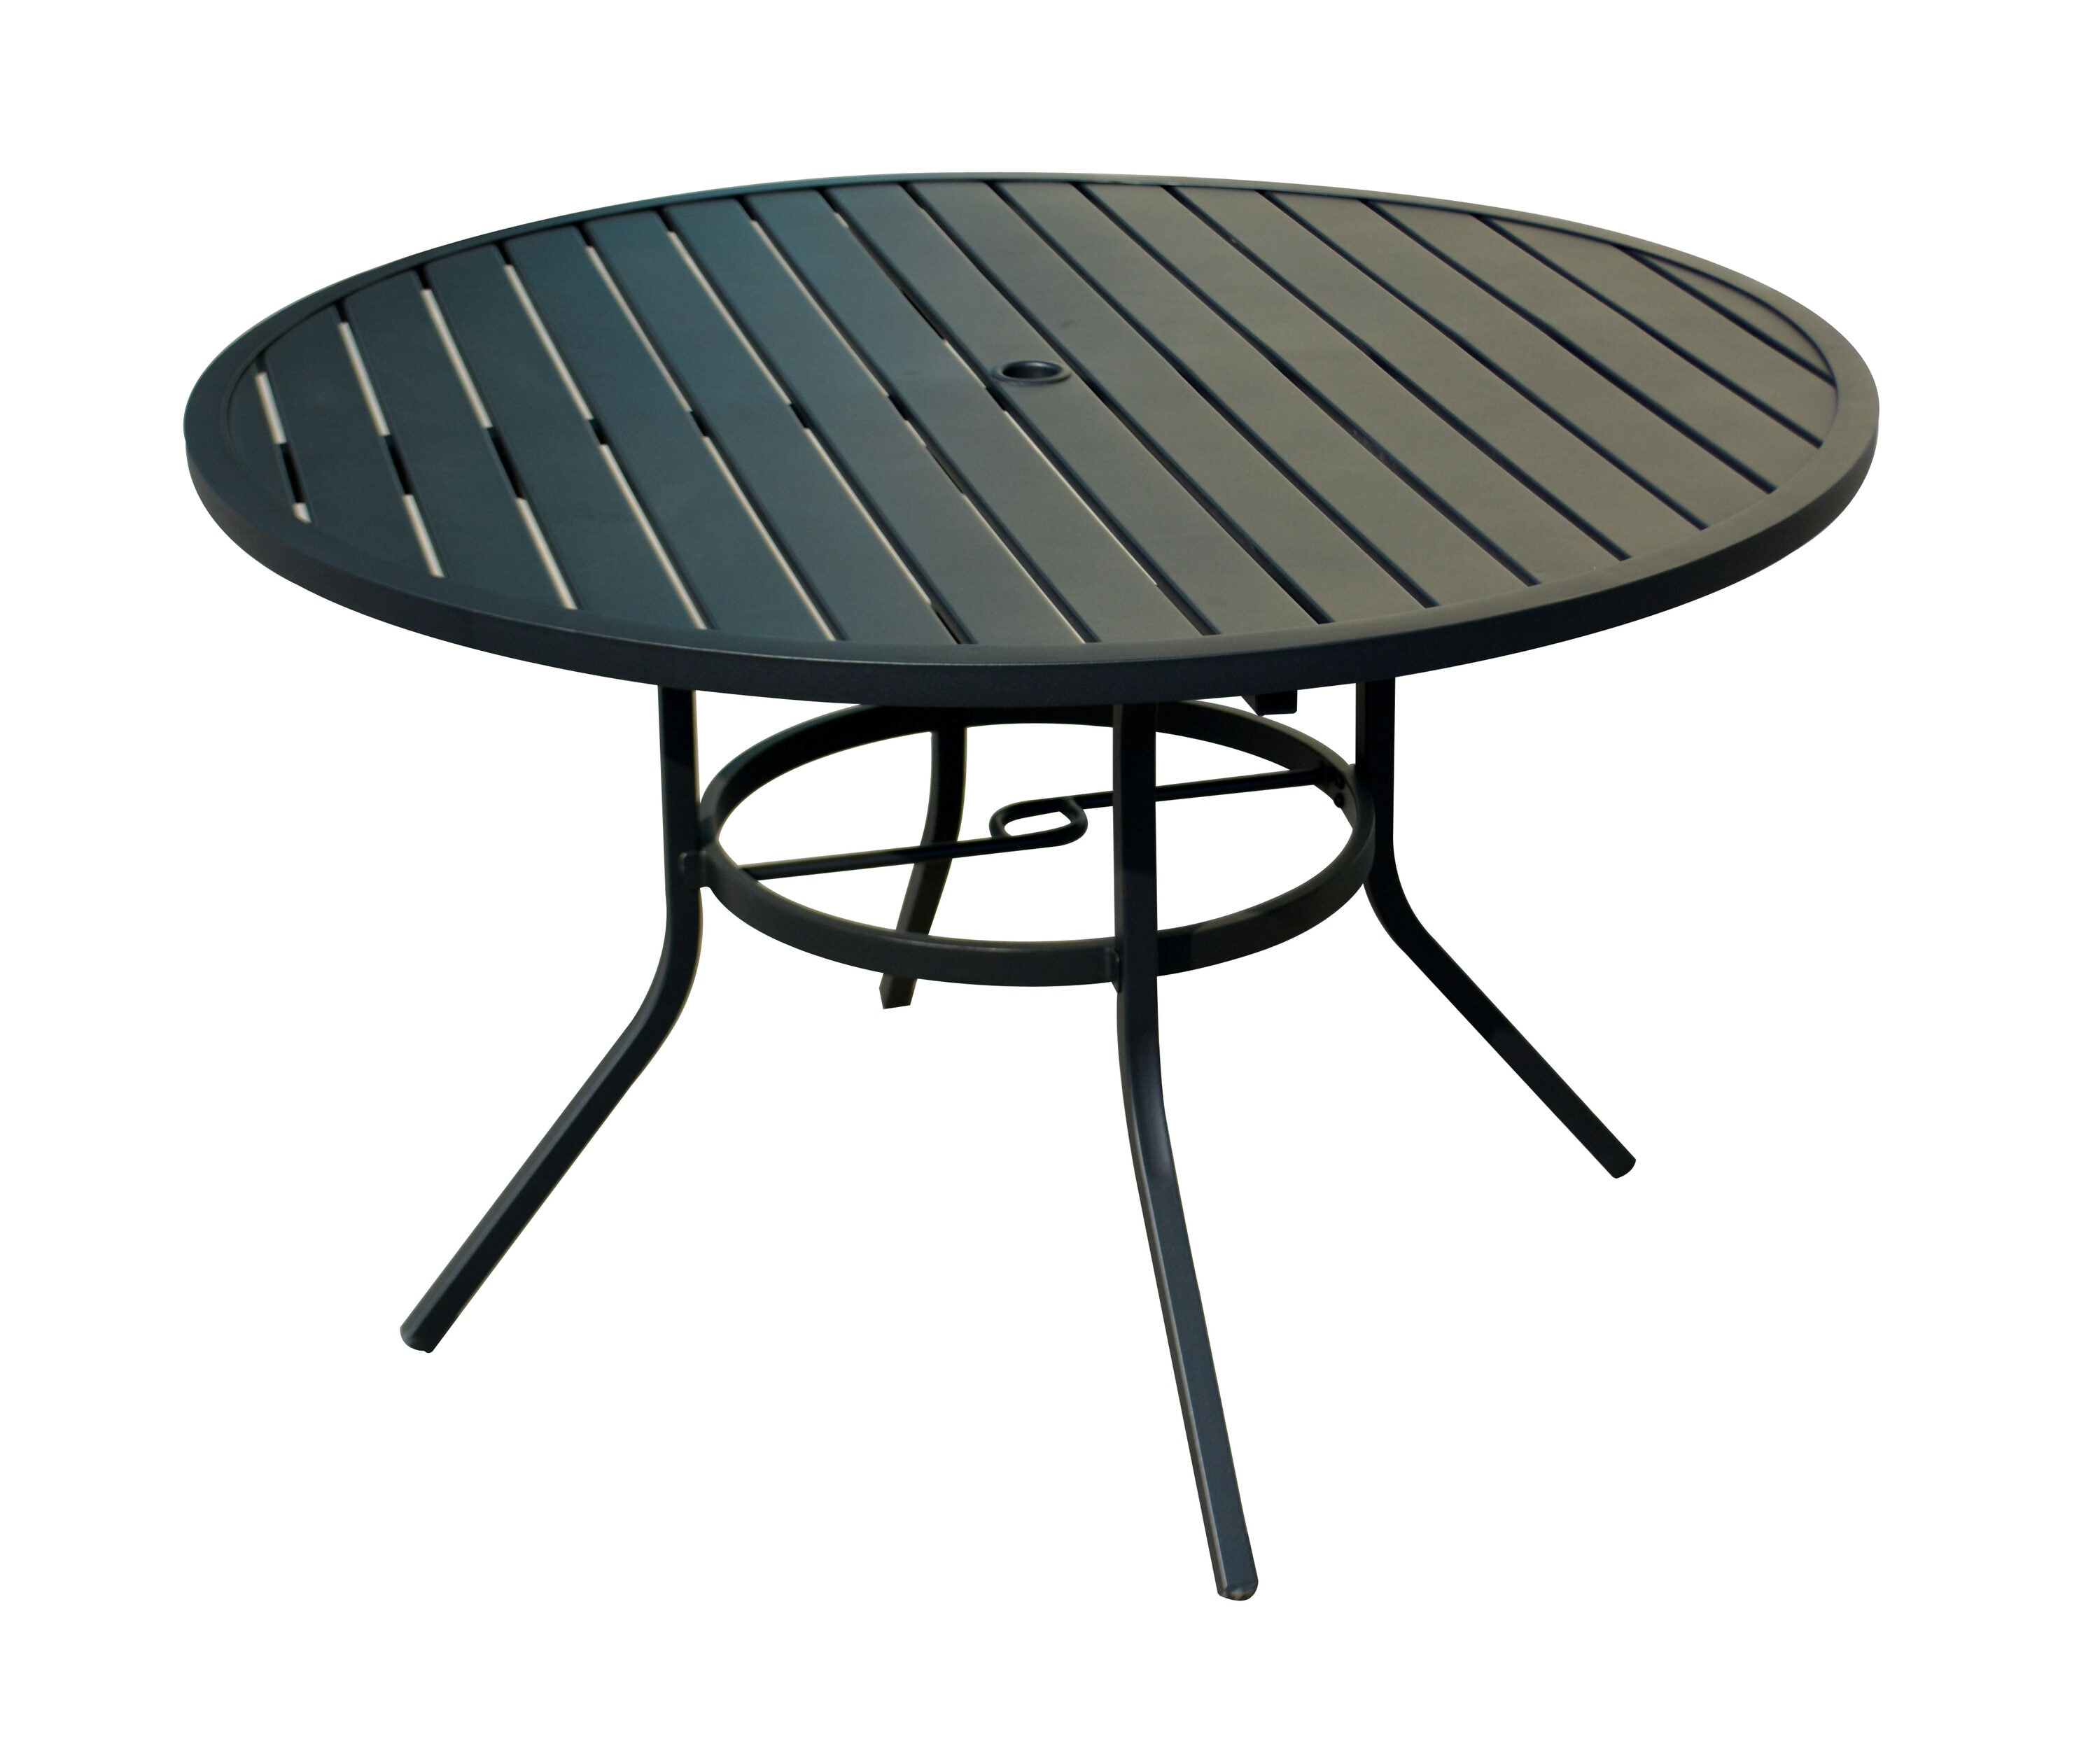 Pelham bay Round Outdoor Dining Table 48-in W x 48-in L with Umbrella Hole | - Style Selections TB-18S129X